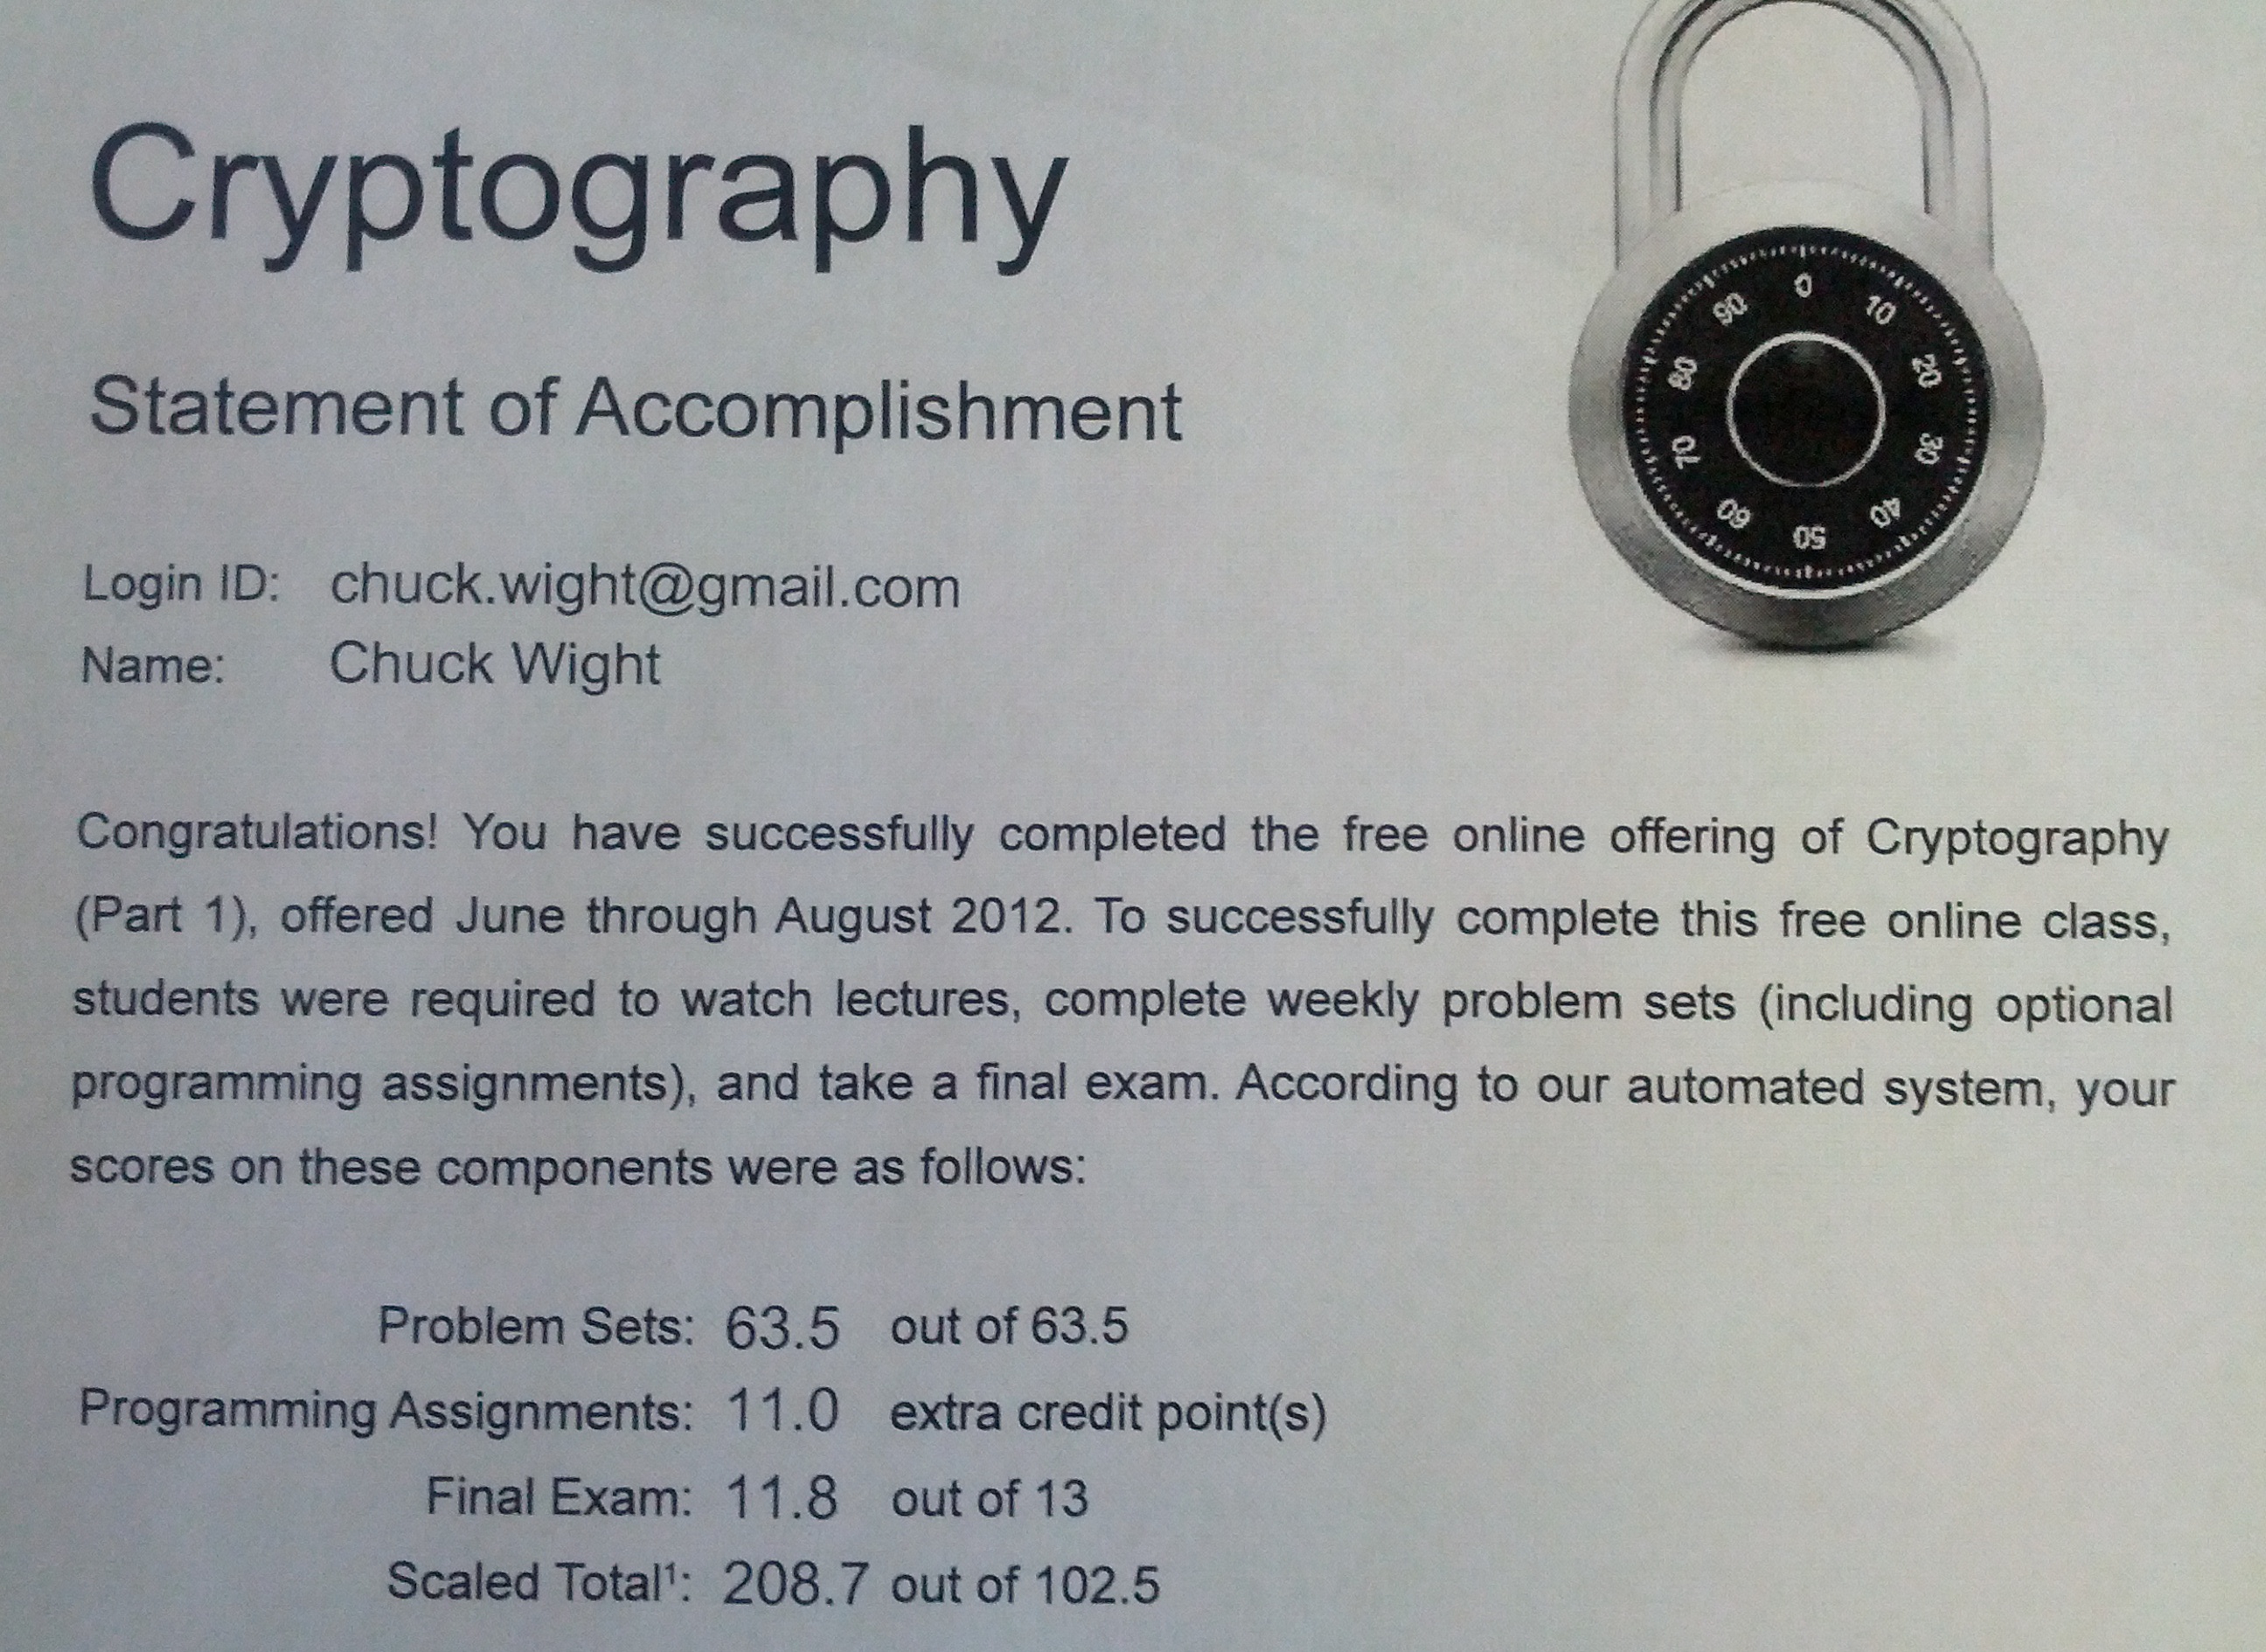 Photo of part of the "Statement of Accomplishment" for Chuck Wight's completion of the Cryptography course.